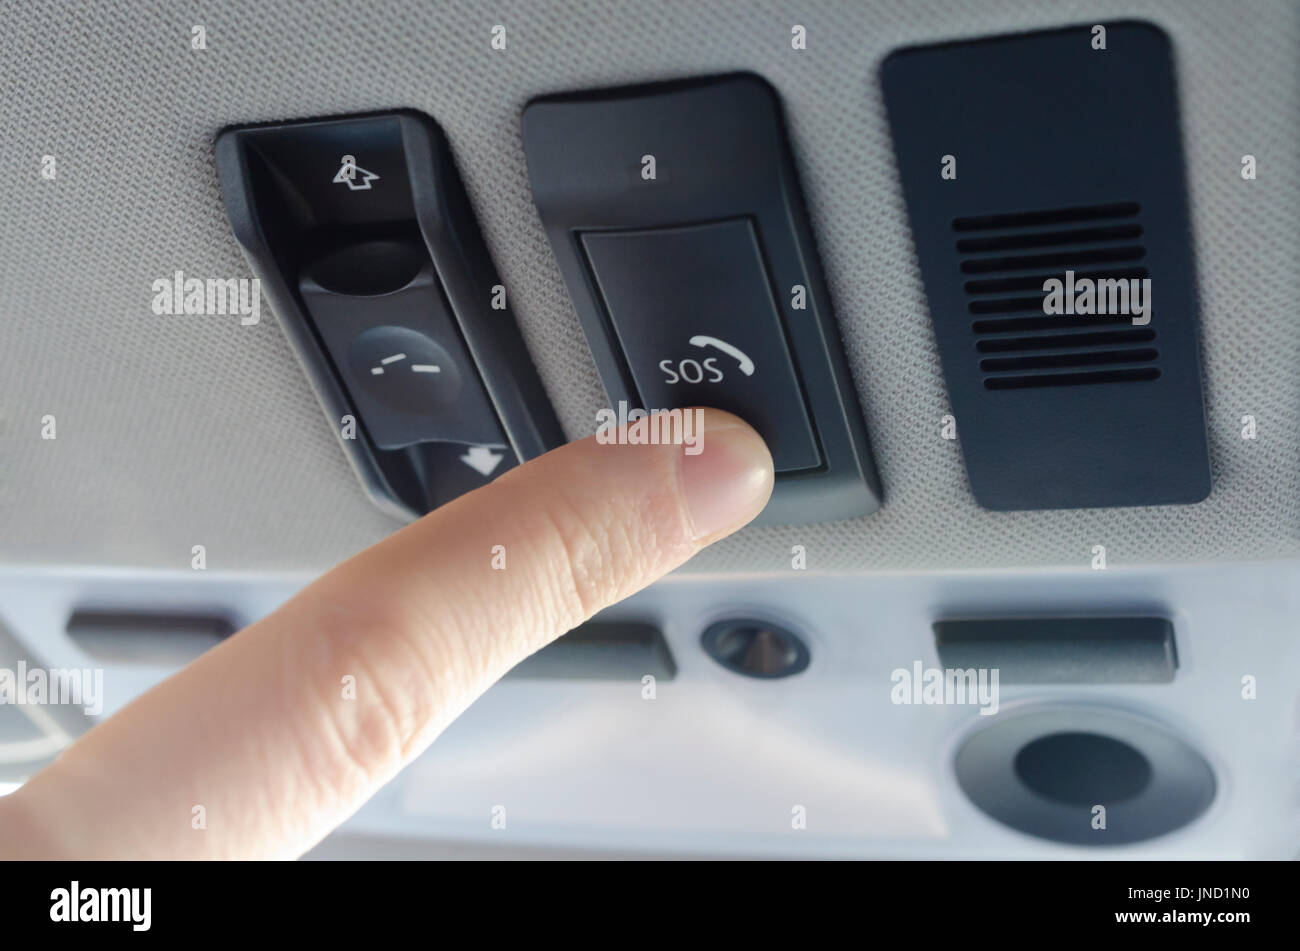 Finger pressing emergency sos button to contact with call center to ask for help after car accident Stock Photo